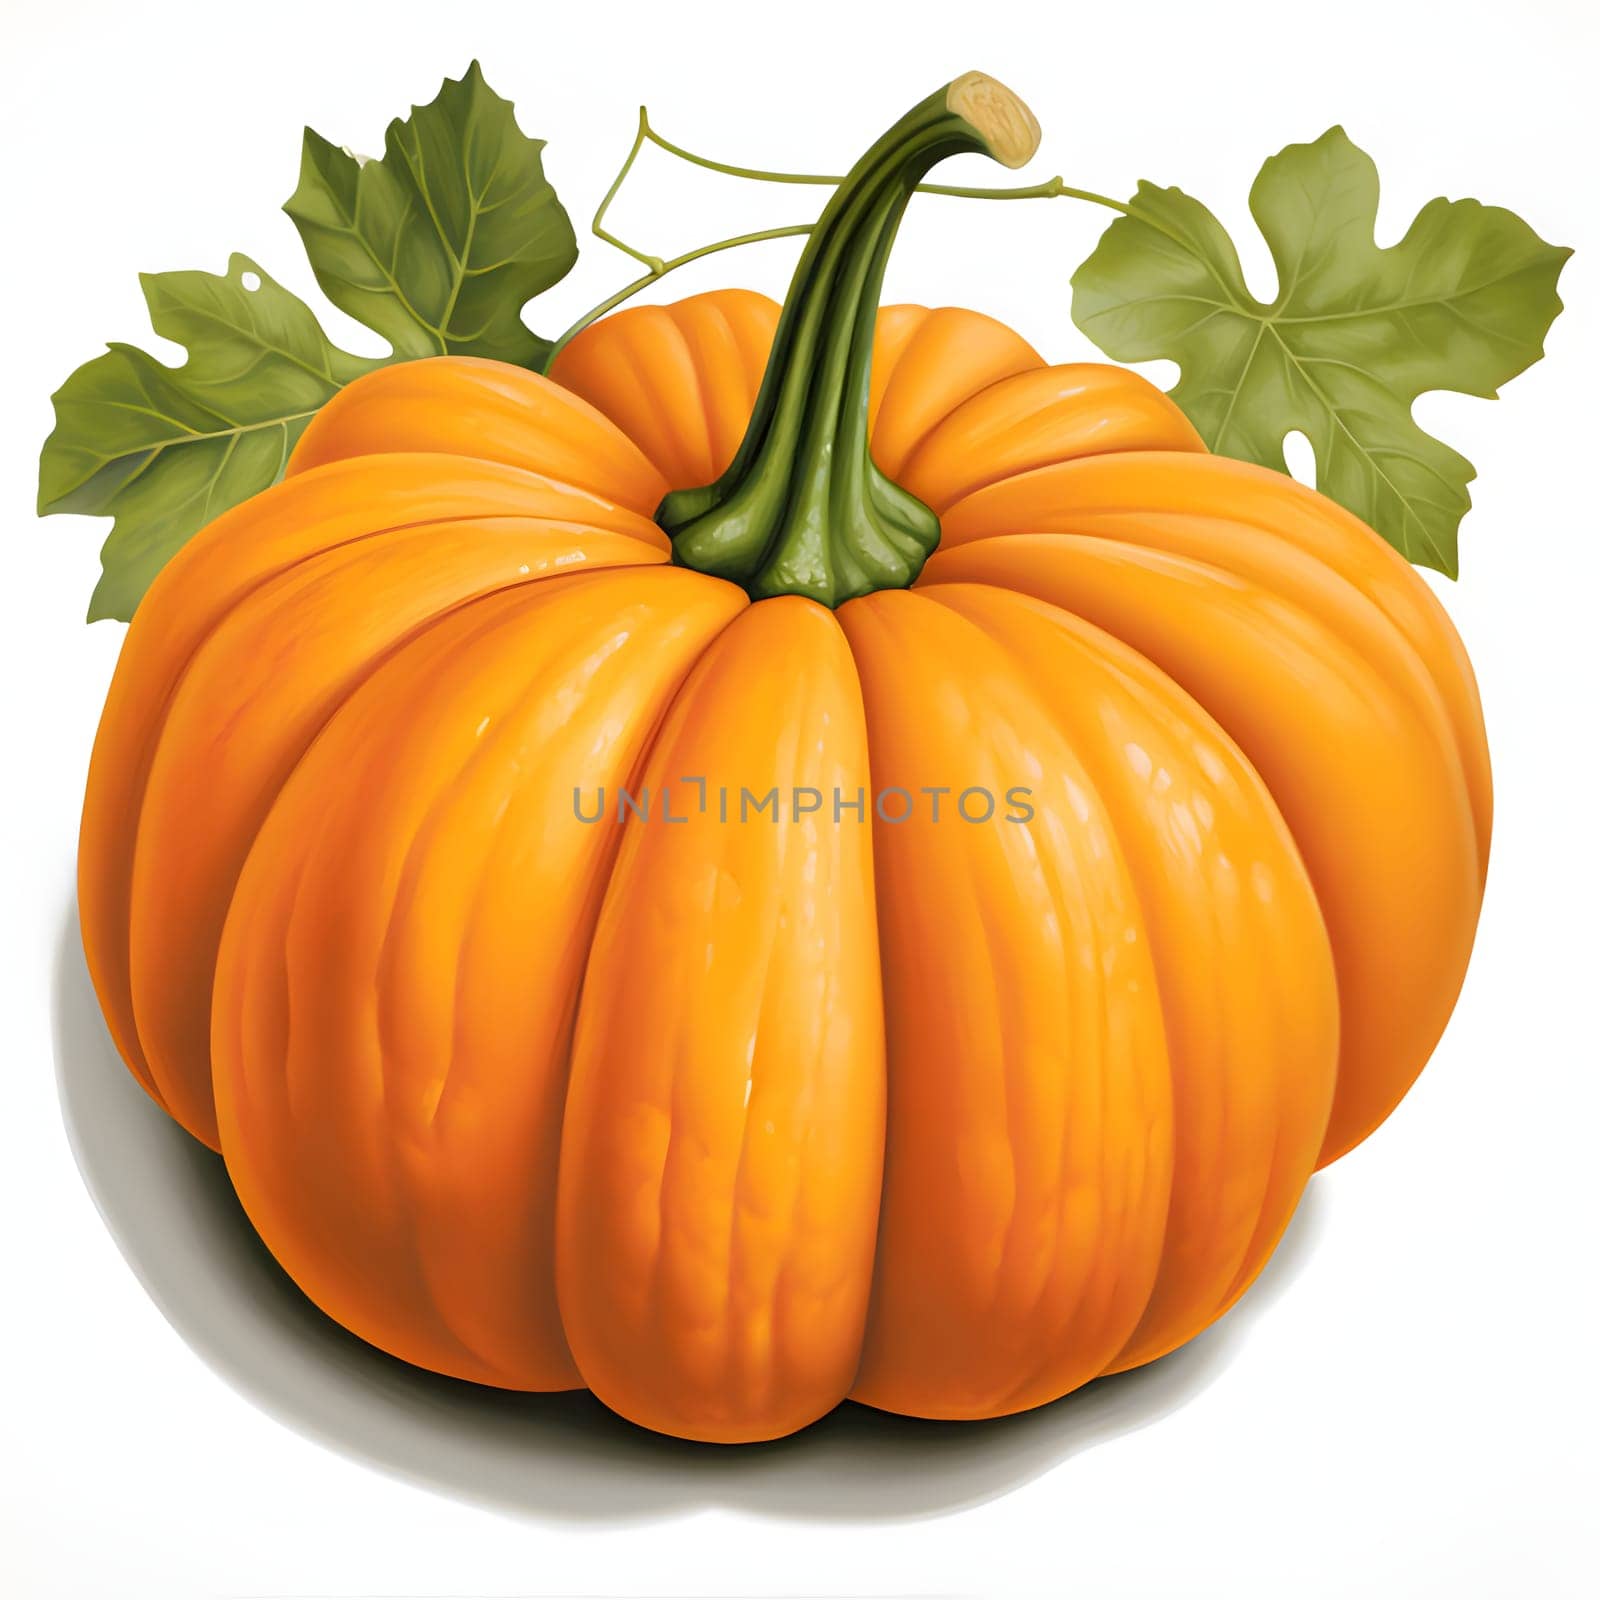 Large isolated pumpkin with a leaf. Pumpkin as a dish of thanksgiving for the harvest, picture on a white isolated background. Atmosphere of joy and celebration.